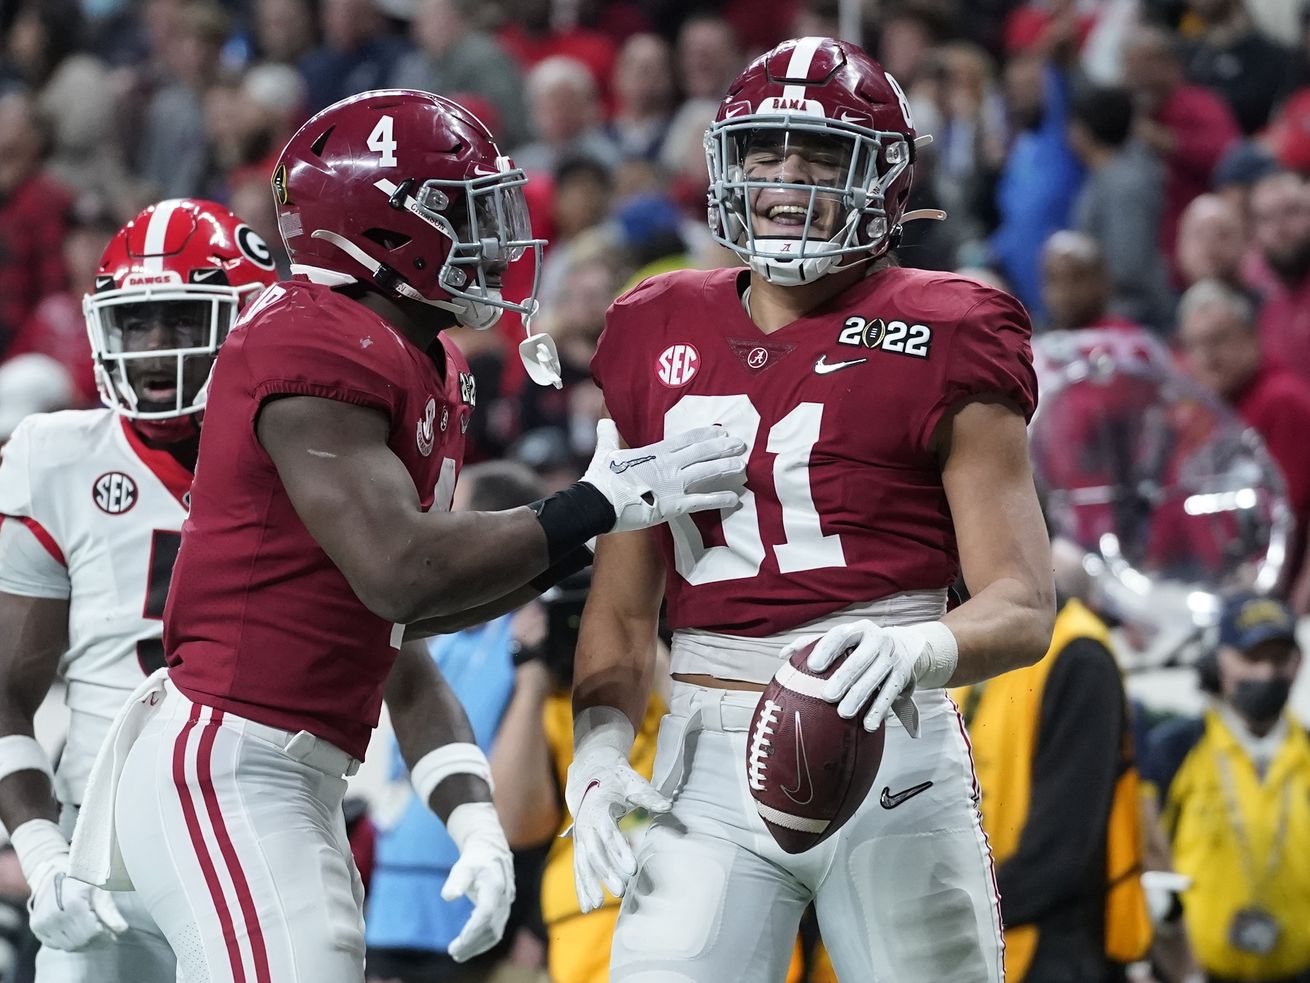 Alabama’s Cameron Latu, wearing red, is congratulated by Brian Robinson Jr. after a long reception 